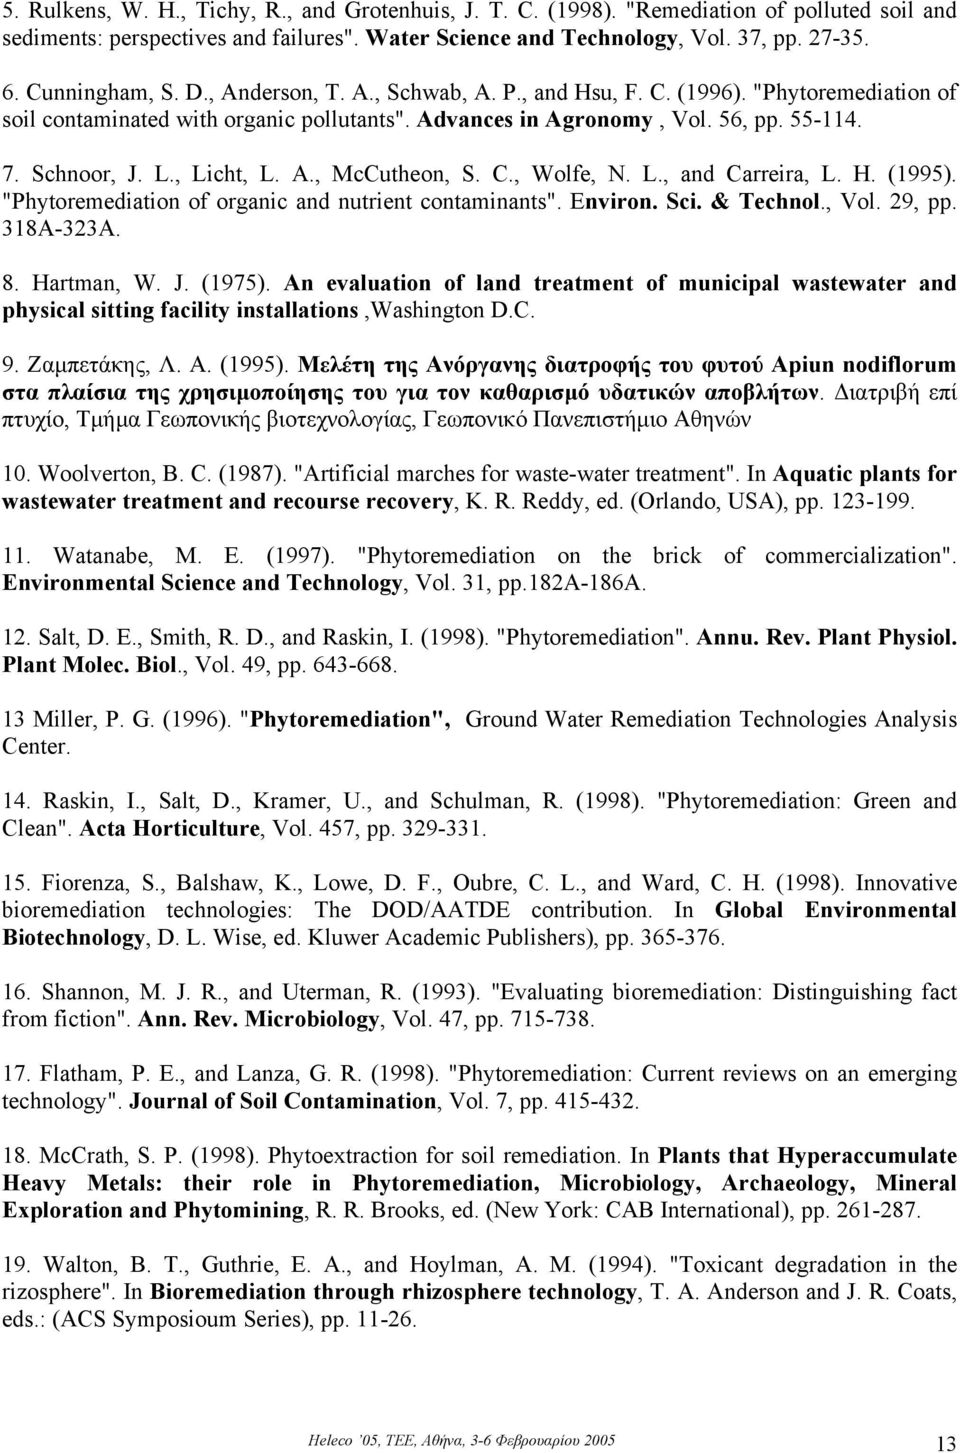 , Licht, L. A., McCutheon, S. C., Wolfe, N. L., and Carreira, L. H. (1995). "Phytoremediation of organic and nutrient contaminants". Environ. Sci. & Technol., Vol. 29, pp. 318A-323A. 8. Hartman, W. J.